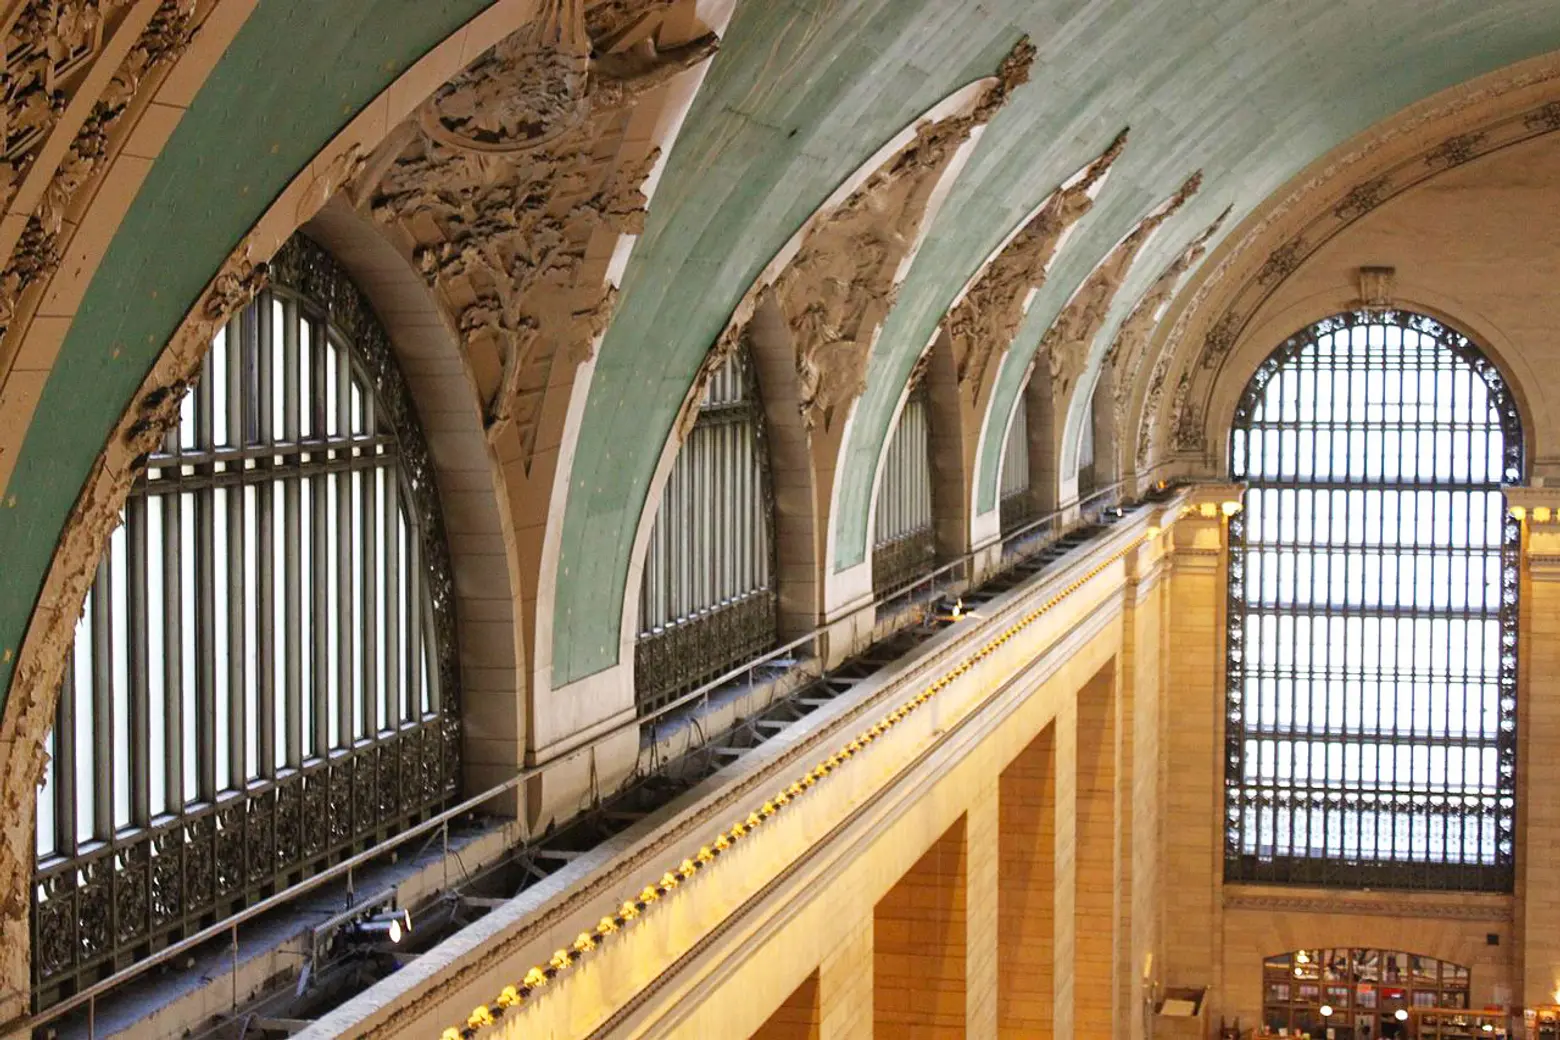 This Sunday, get access to Grand Central’s secret glass catwalk